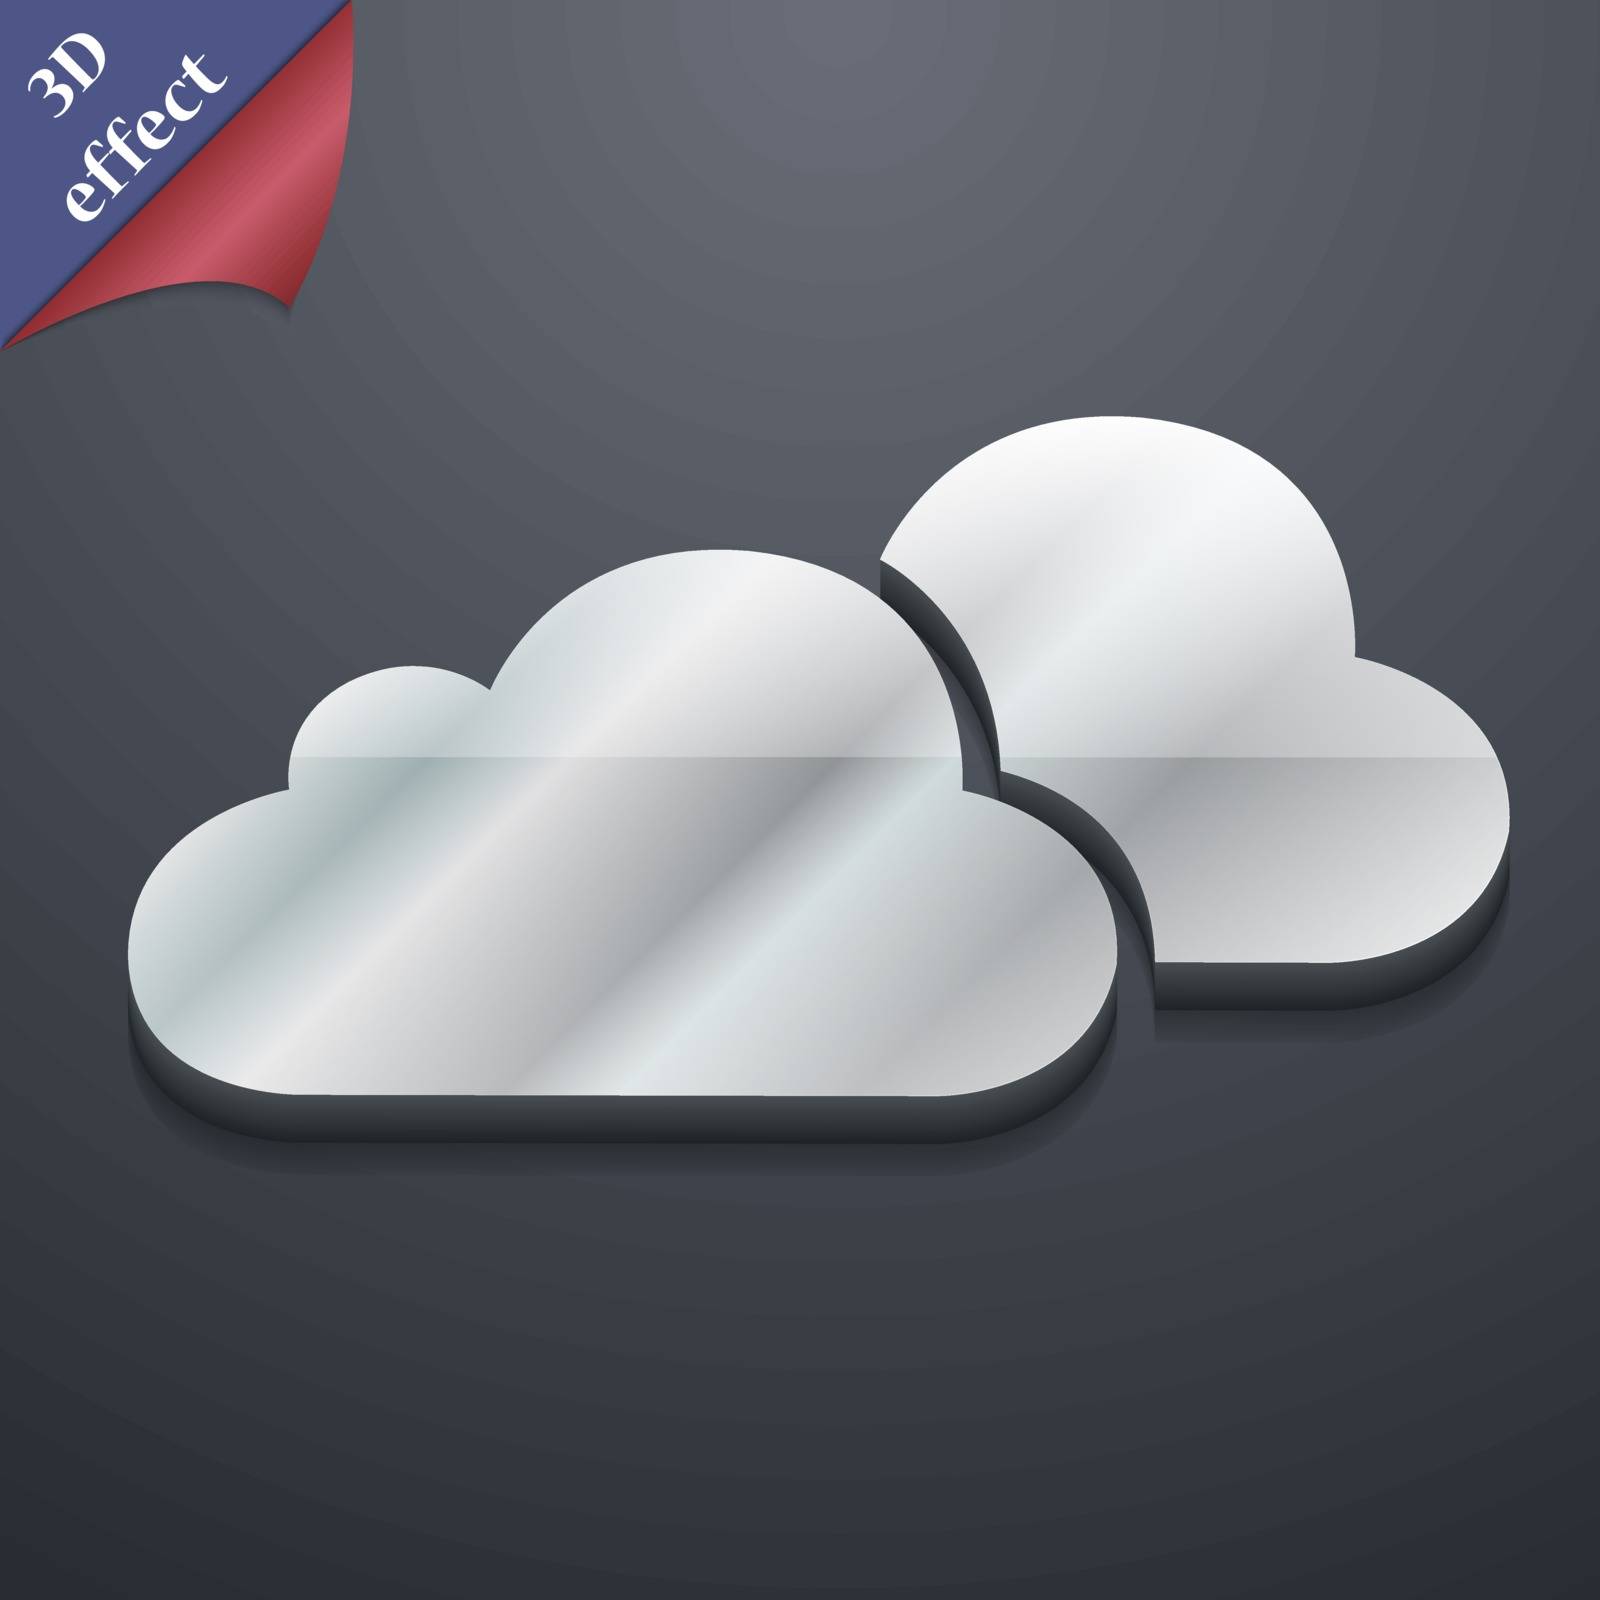 clouds icon symbol. 3D style. Trendy, modern design with space for your text Vector illustration